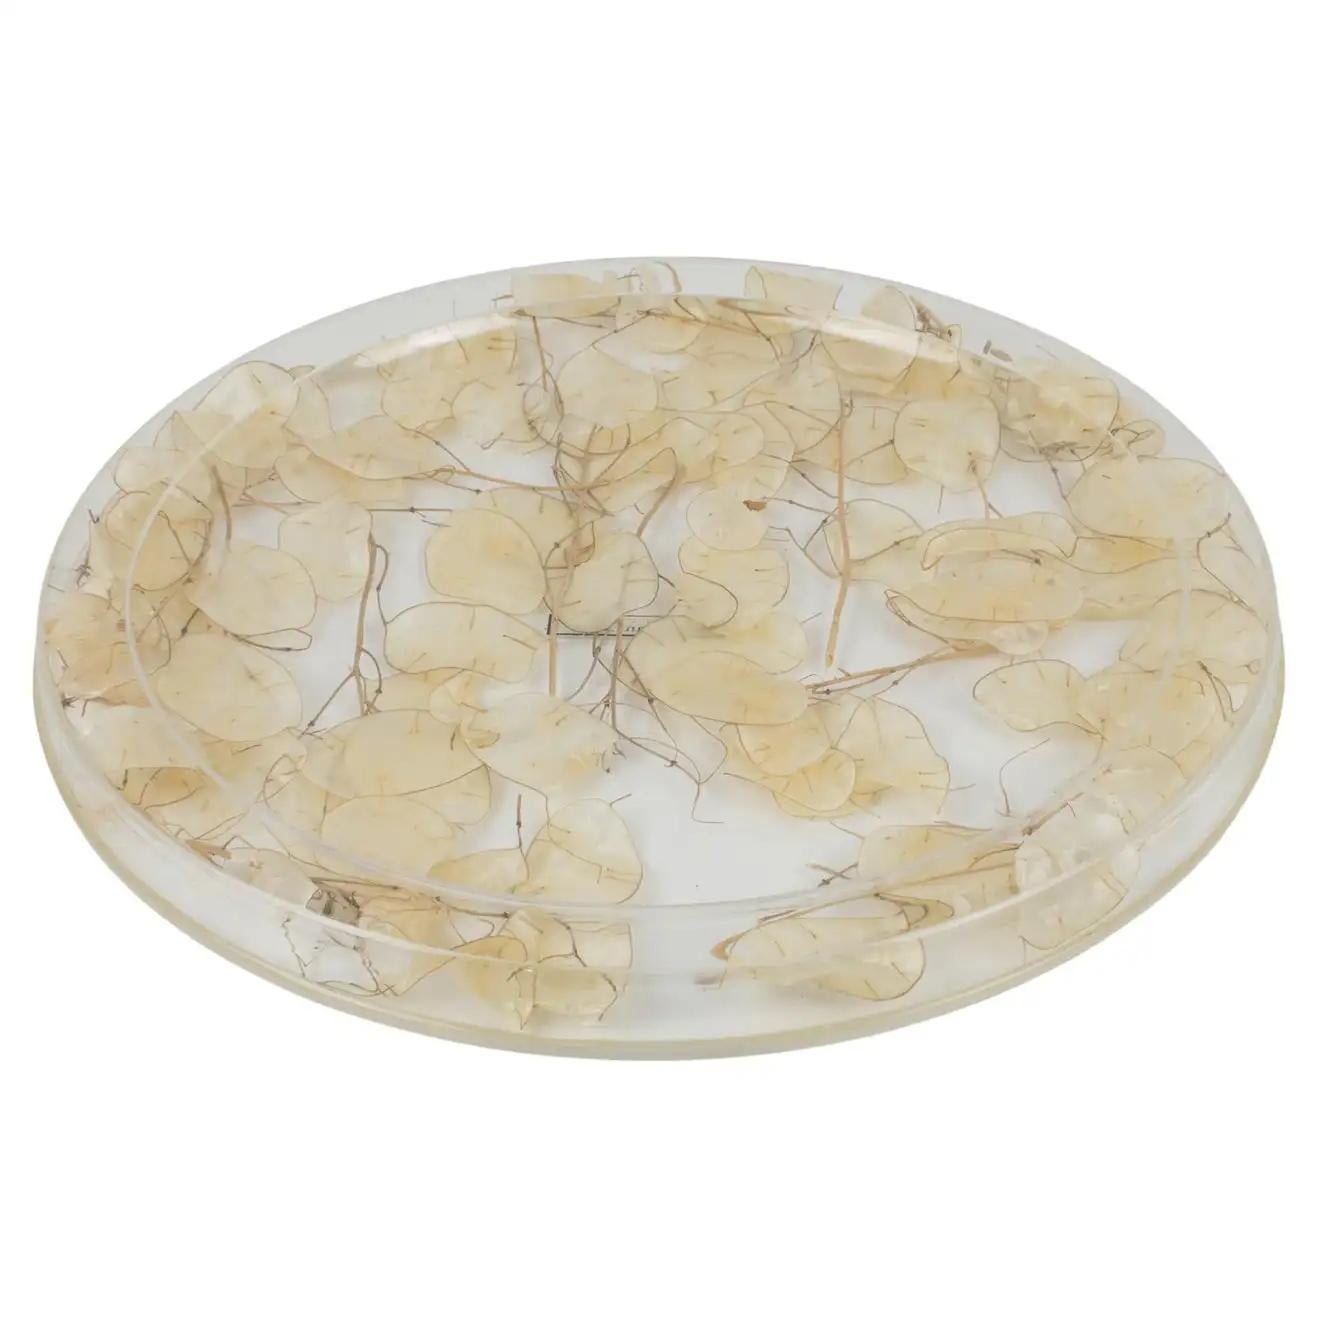 Acrylic Christian Dior Home Collection Lucite Tray Board Platter with Dried Lunaria For Sale